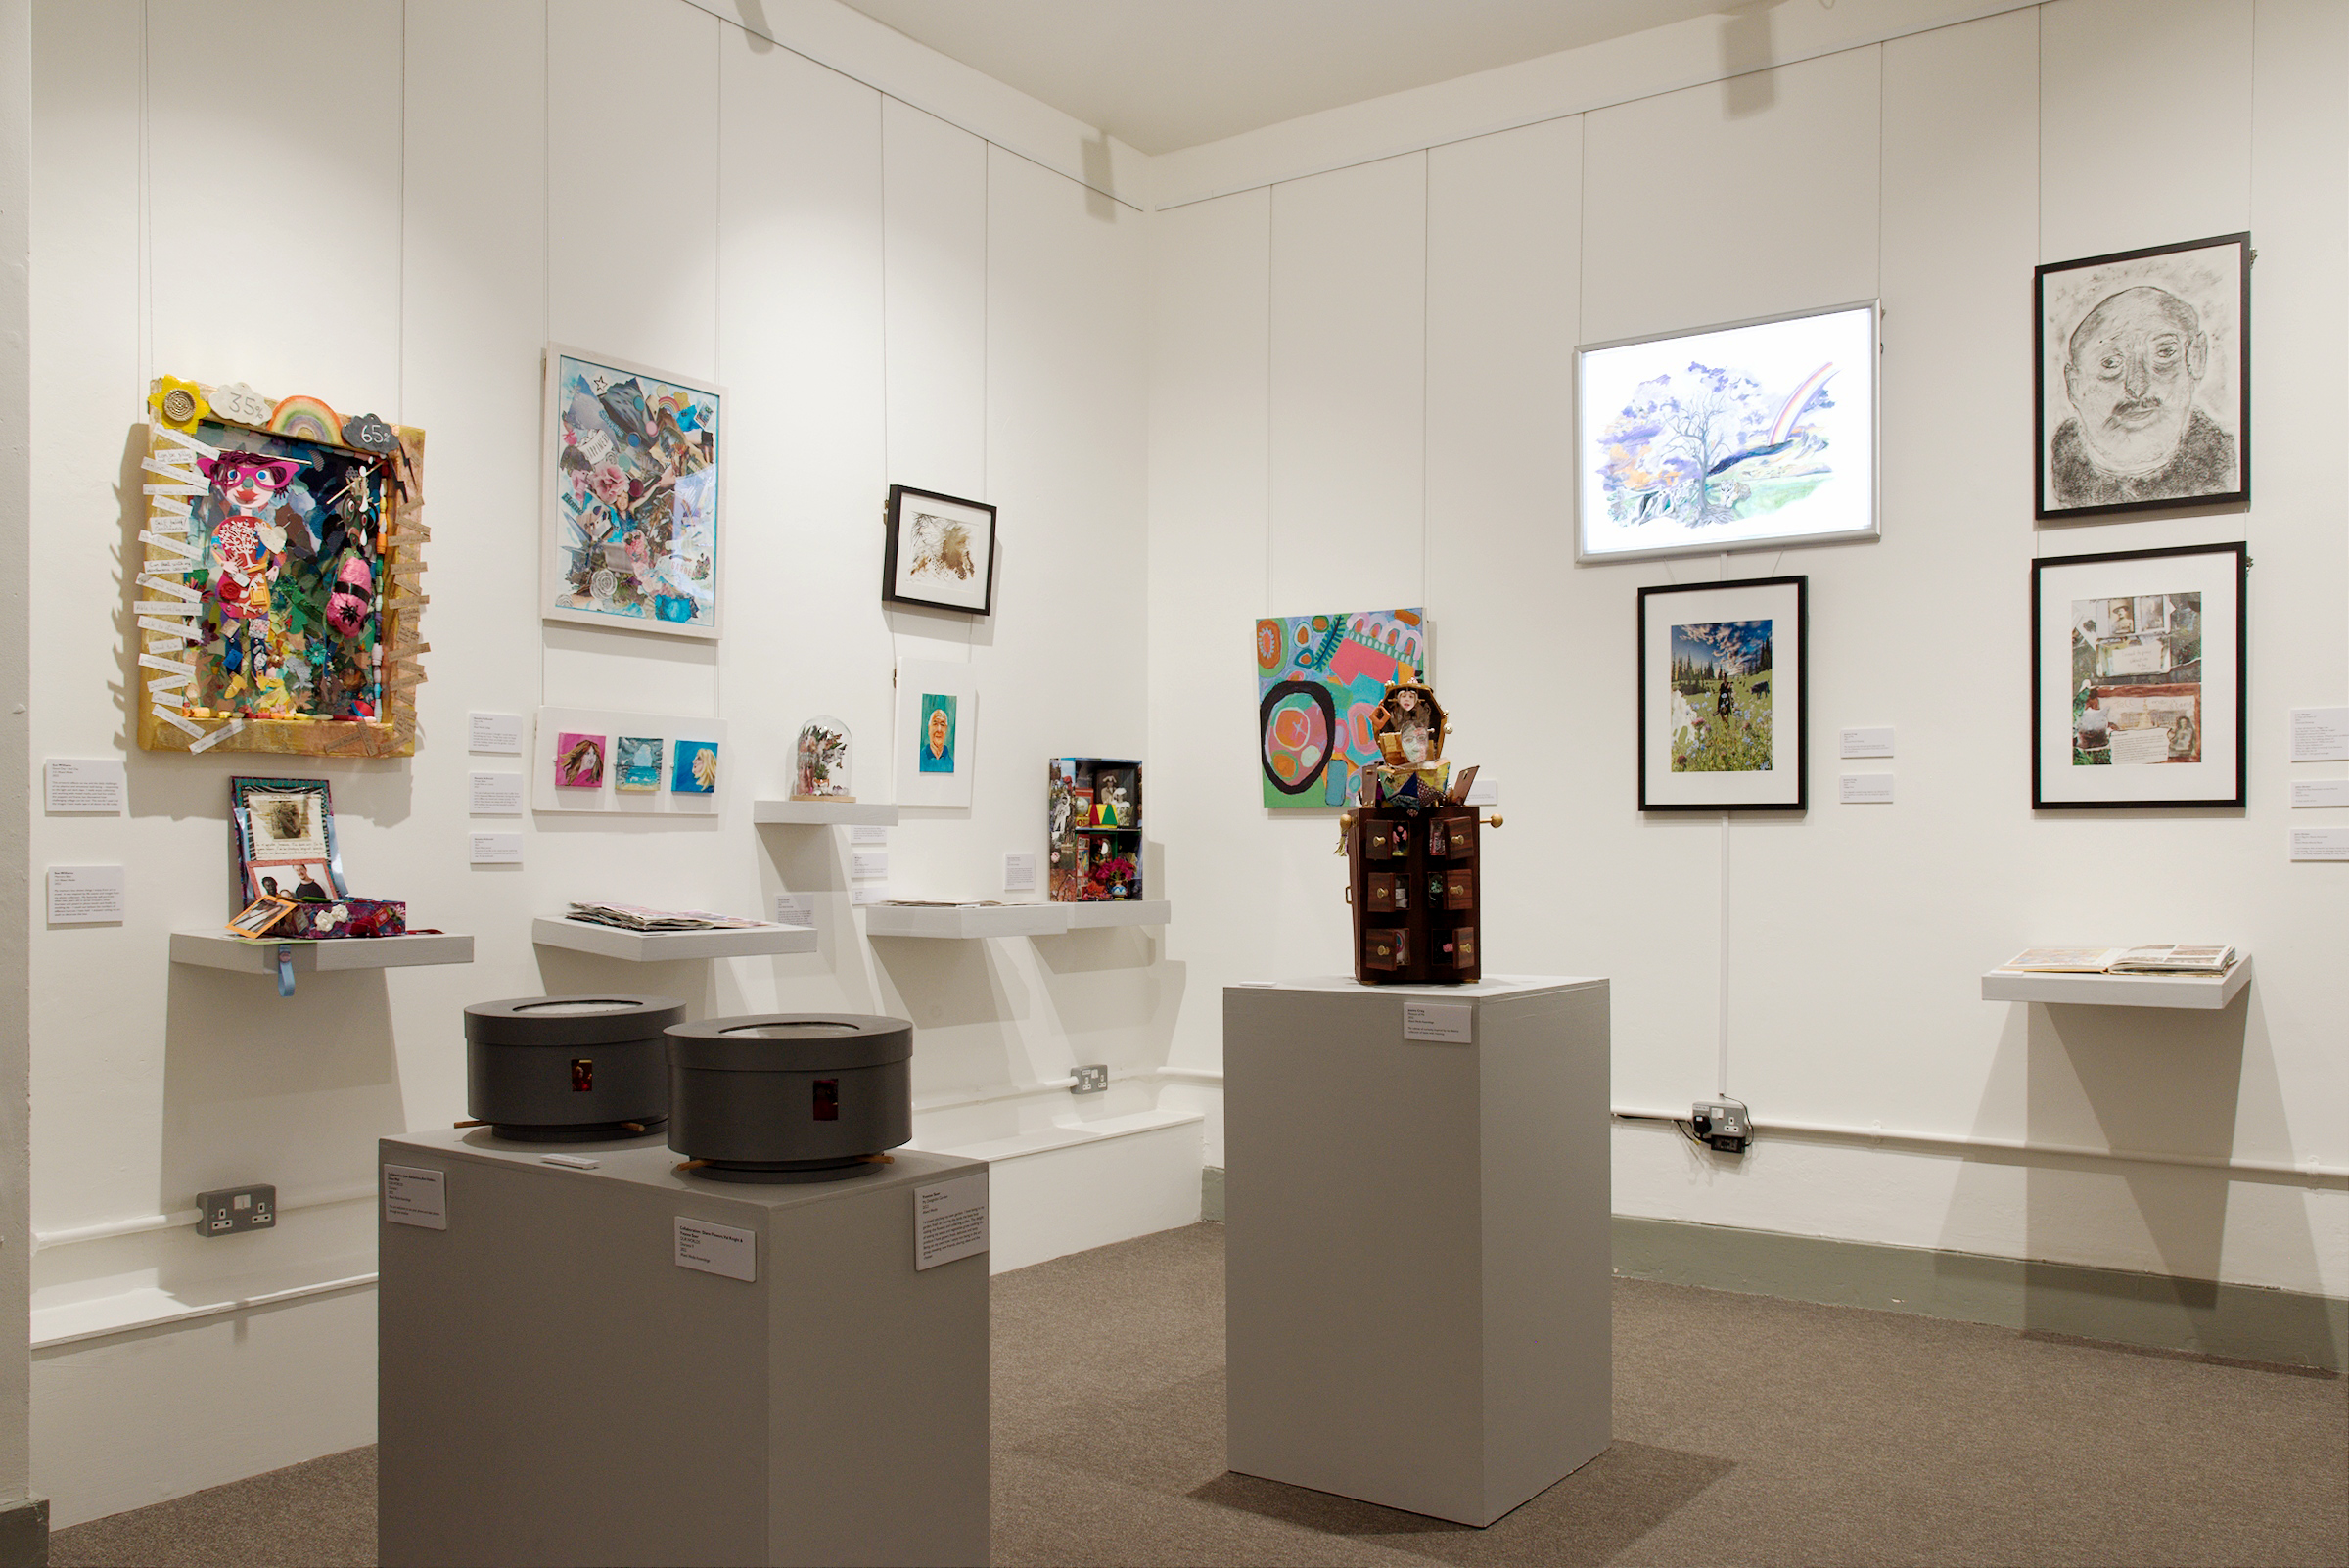 The History gallery is a new free to access space showing artwork from the local community 